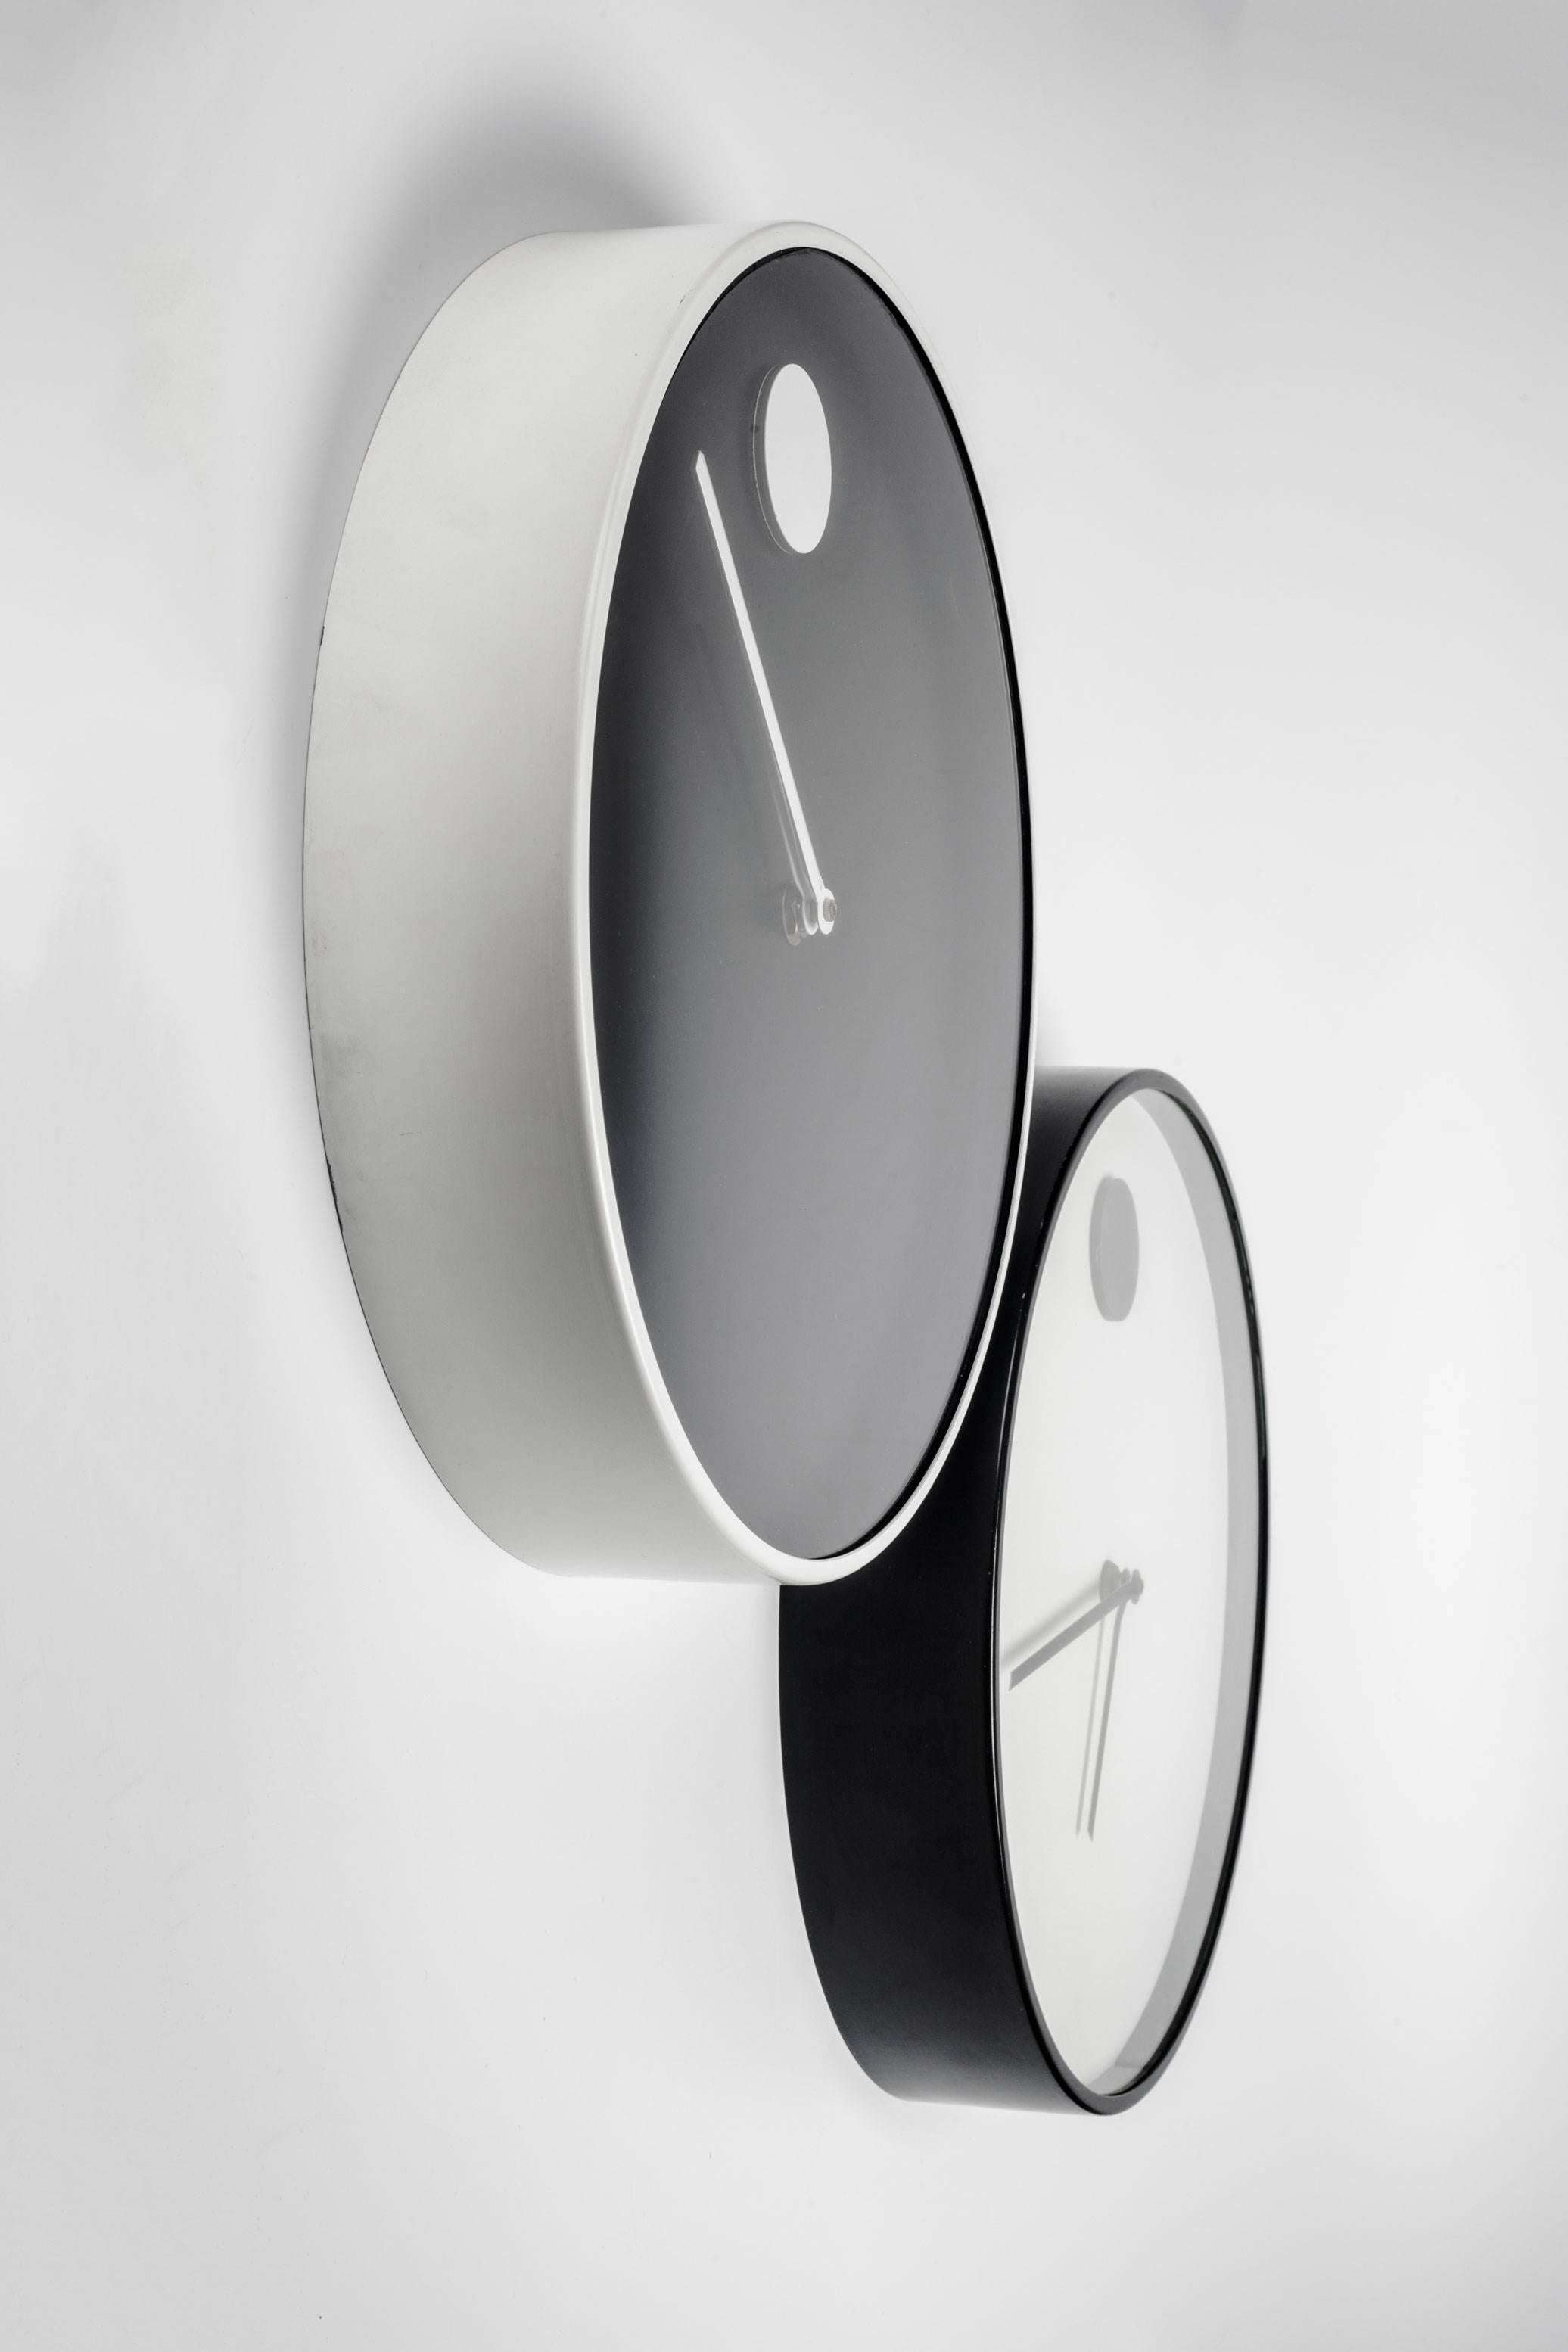 Black wall clock with white metal frame, part of the MoMA design collection, 1970. Designed by Nathan George Horwitt for Howard Miller. Metal lacquered case and glass front. A wall clock version of Horwitt's previous watch design for Movado.

Nathan